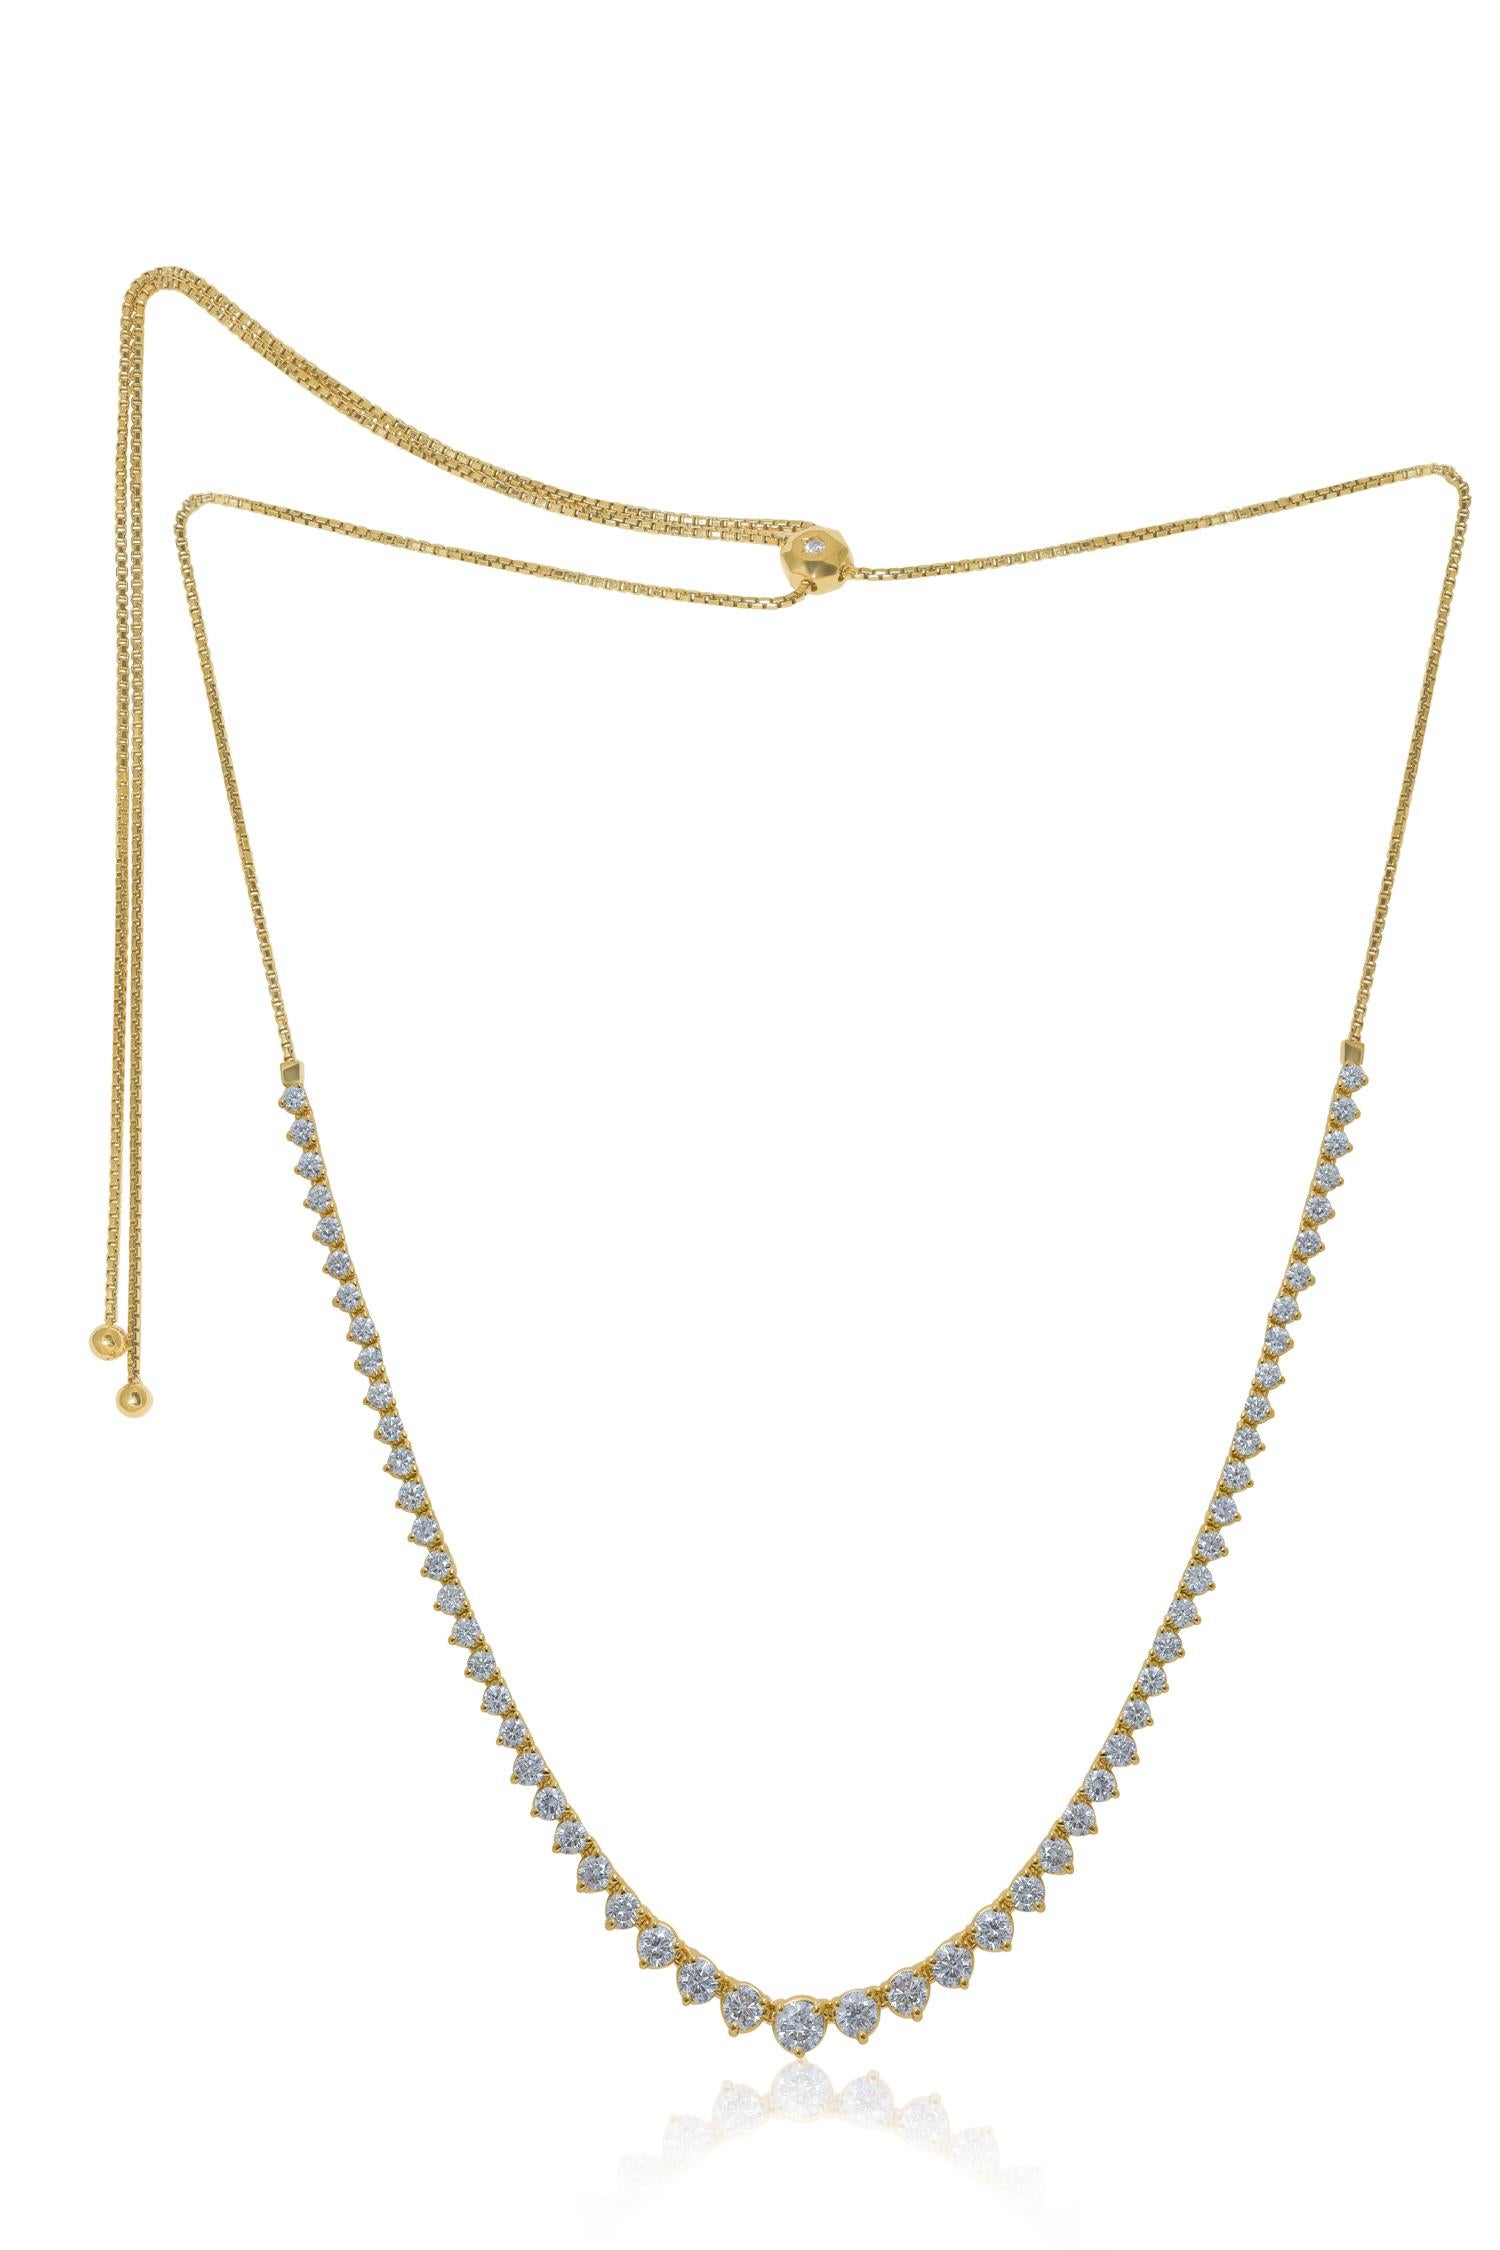 Round Cut Diana M. Custom 3.50 Cts Round Diamond 14k Yellow Gold Graduated Bolo Necklace For Sale